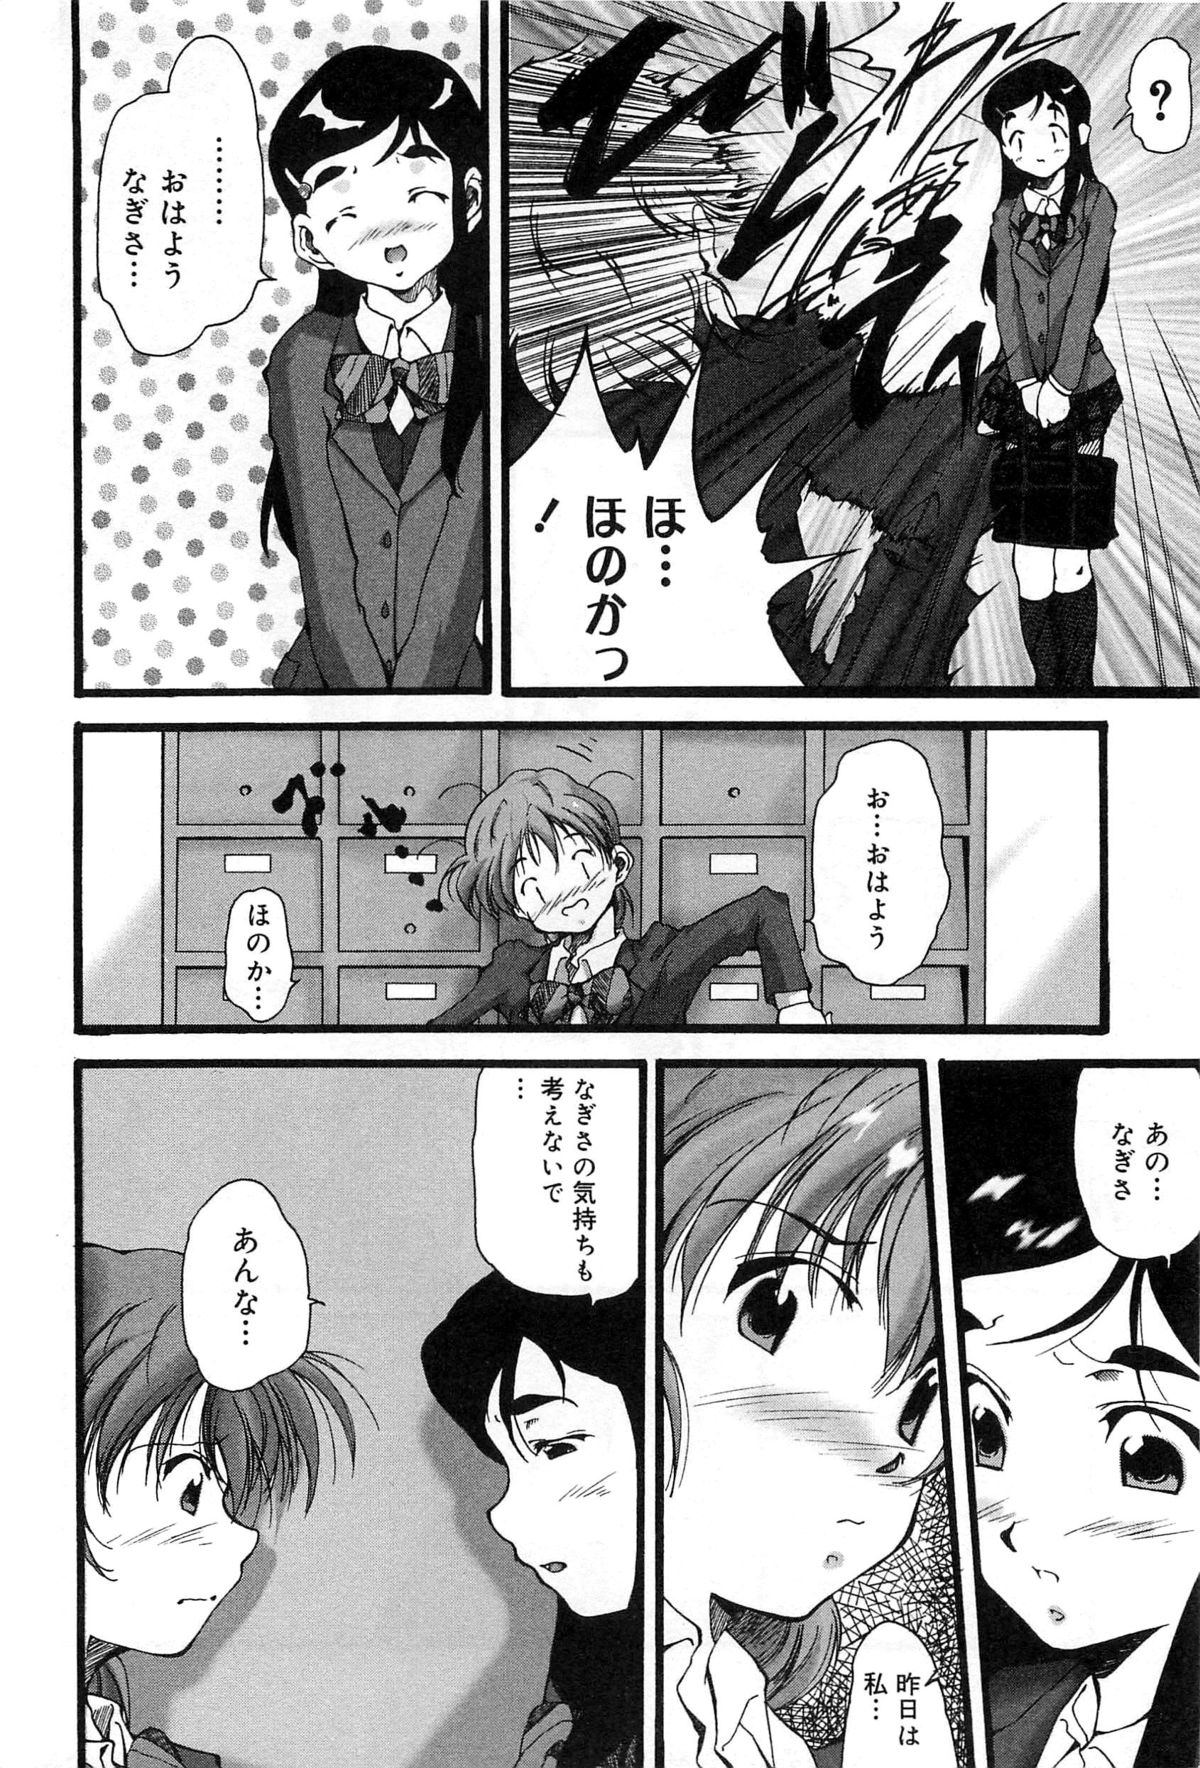 [Anthology] Cure Cure Battle Precure Eroparo page 49 full